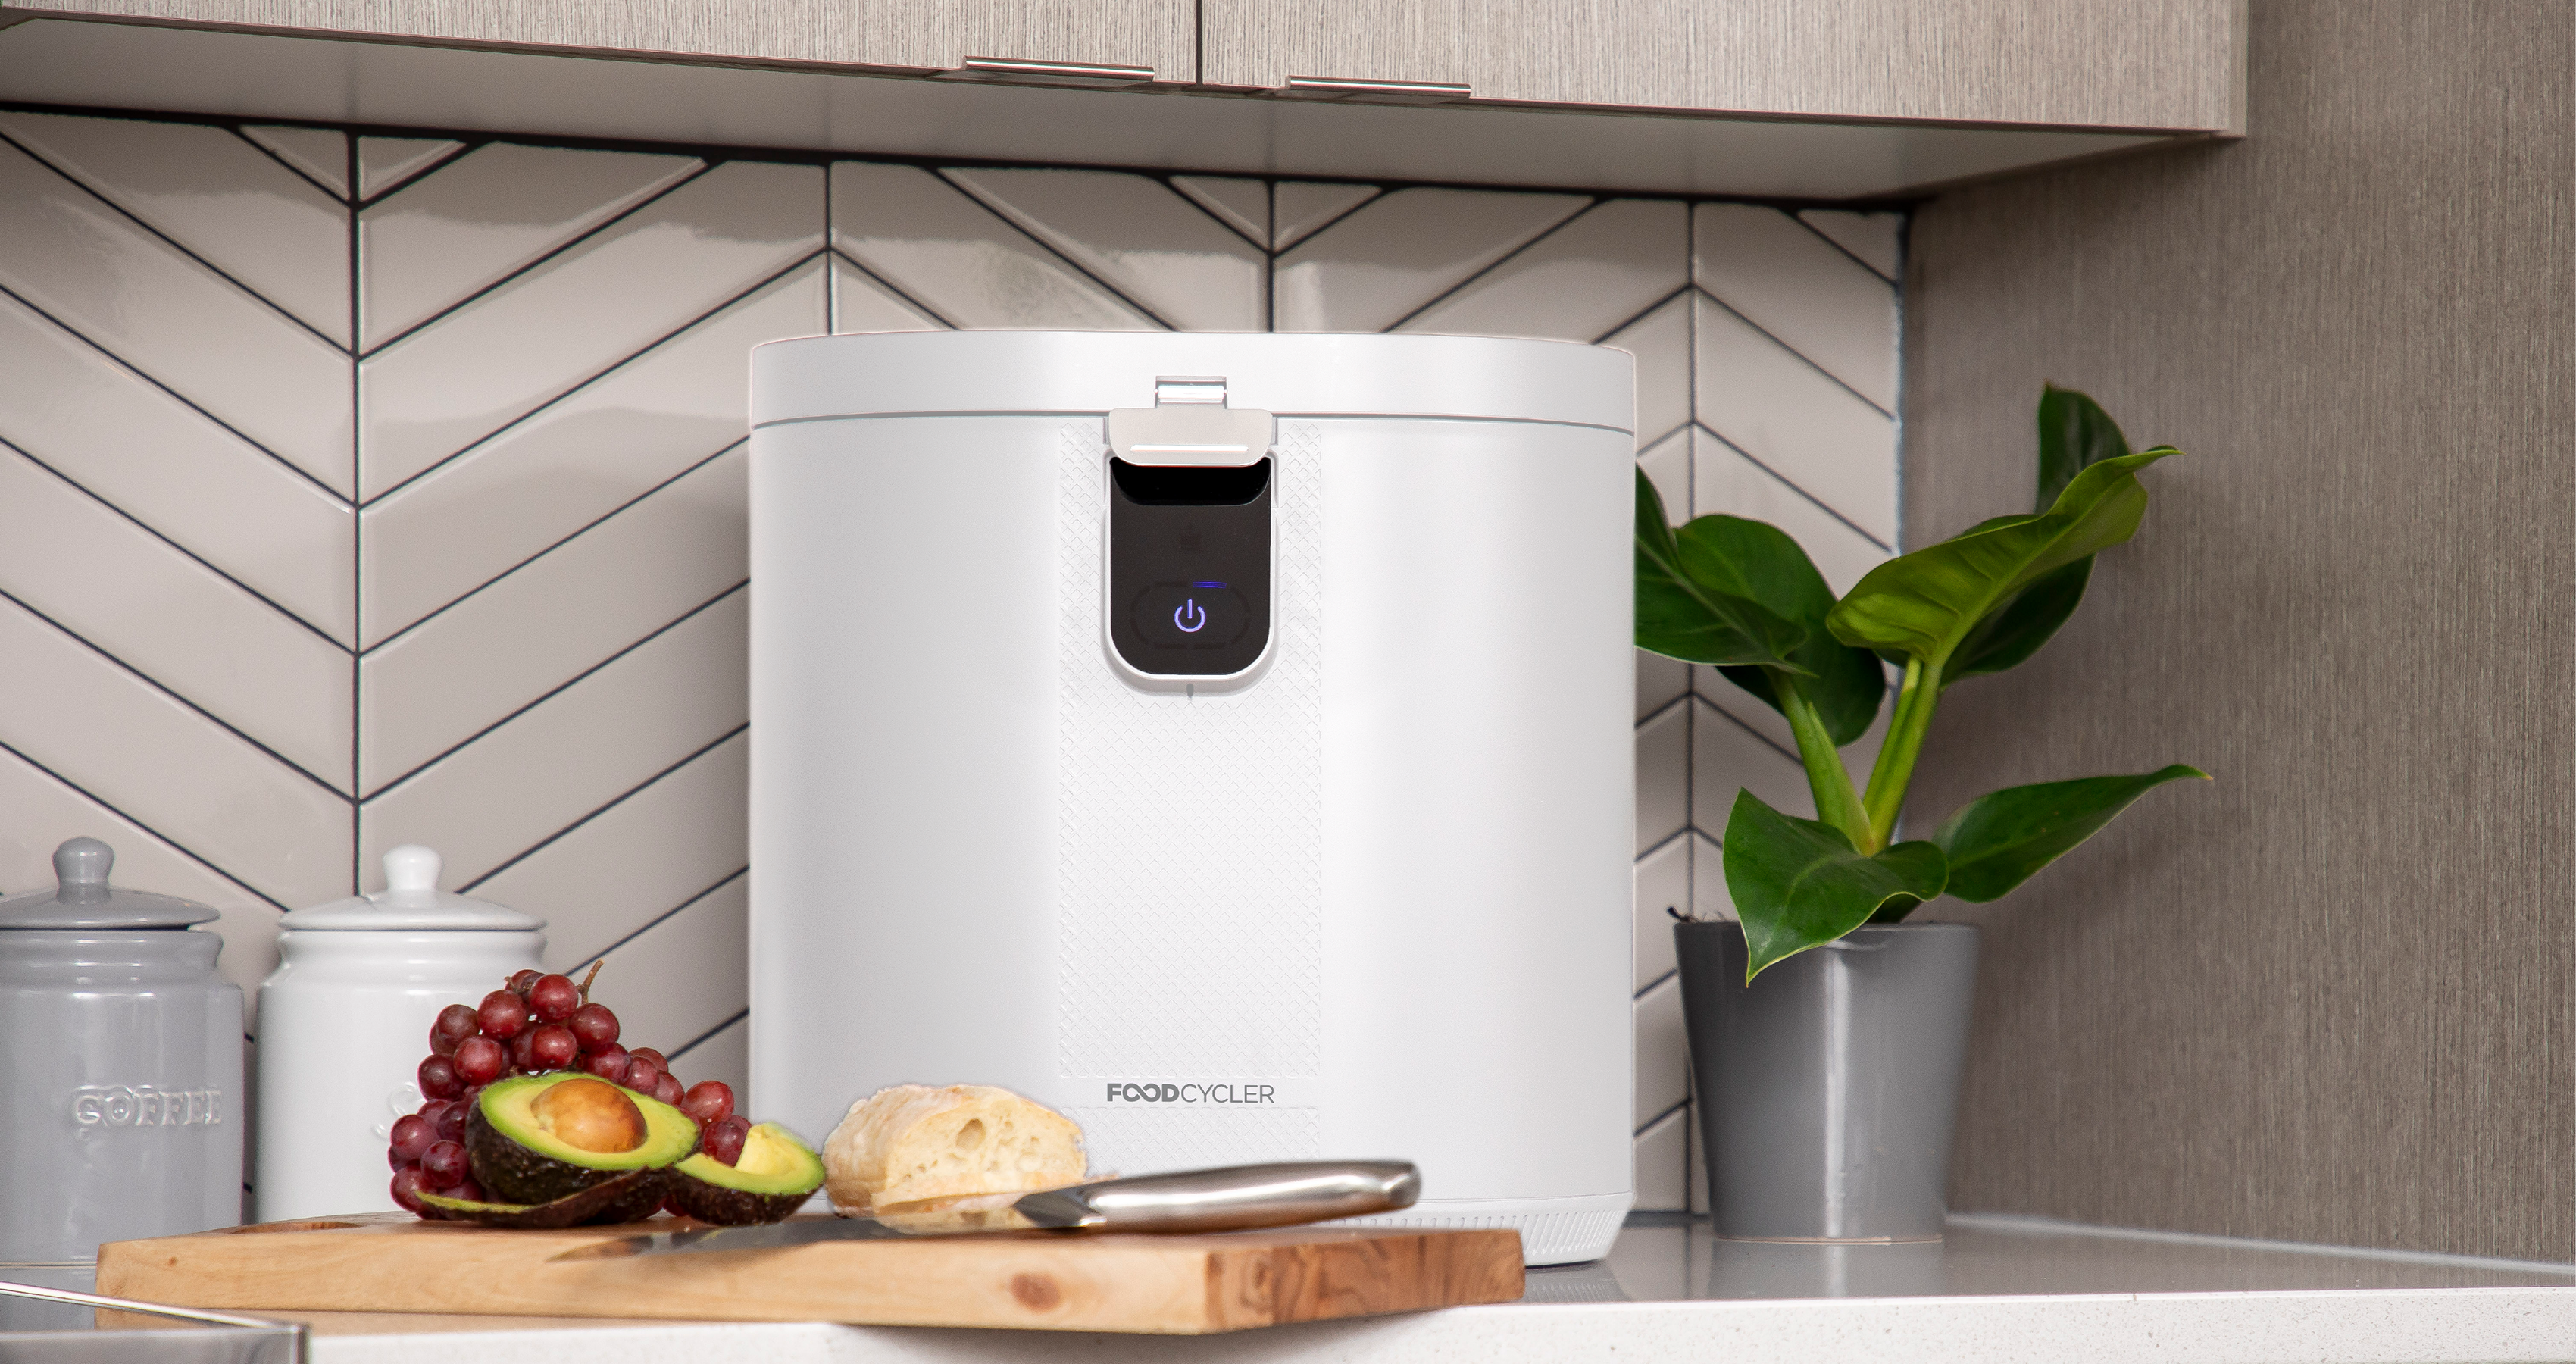 Beyond Earth | The Eco 5™ FoodCycler